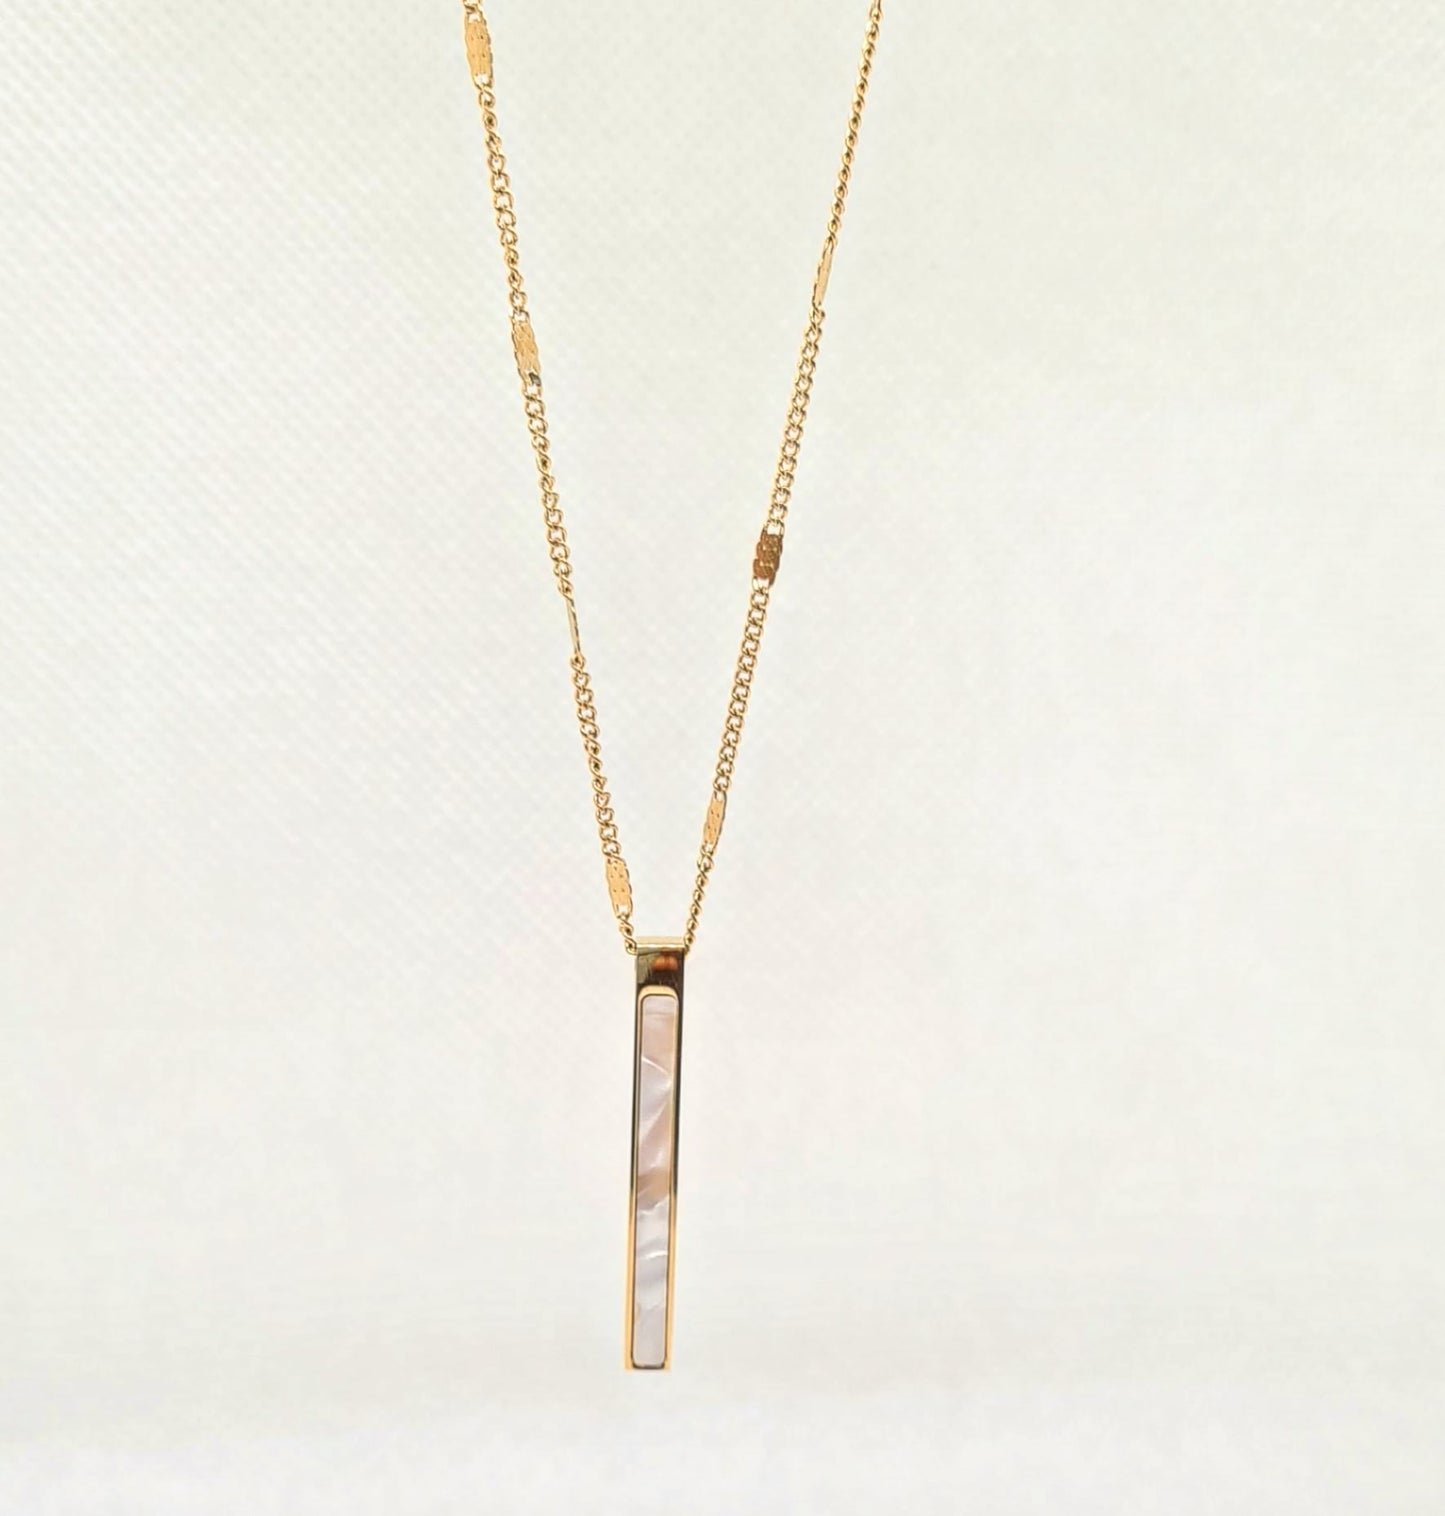 Ayla Necklace a sleek and delicate golden chain with a long shell pendant.